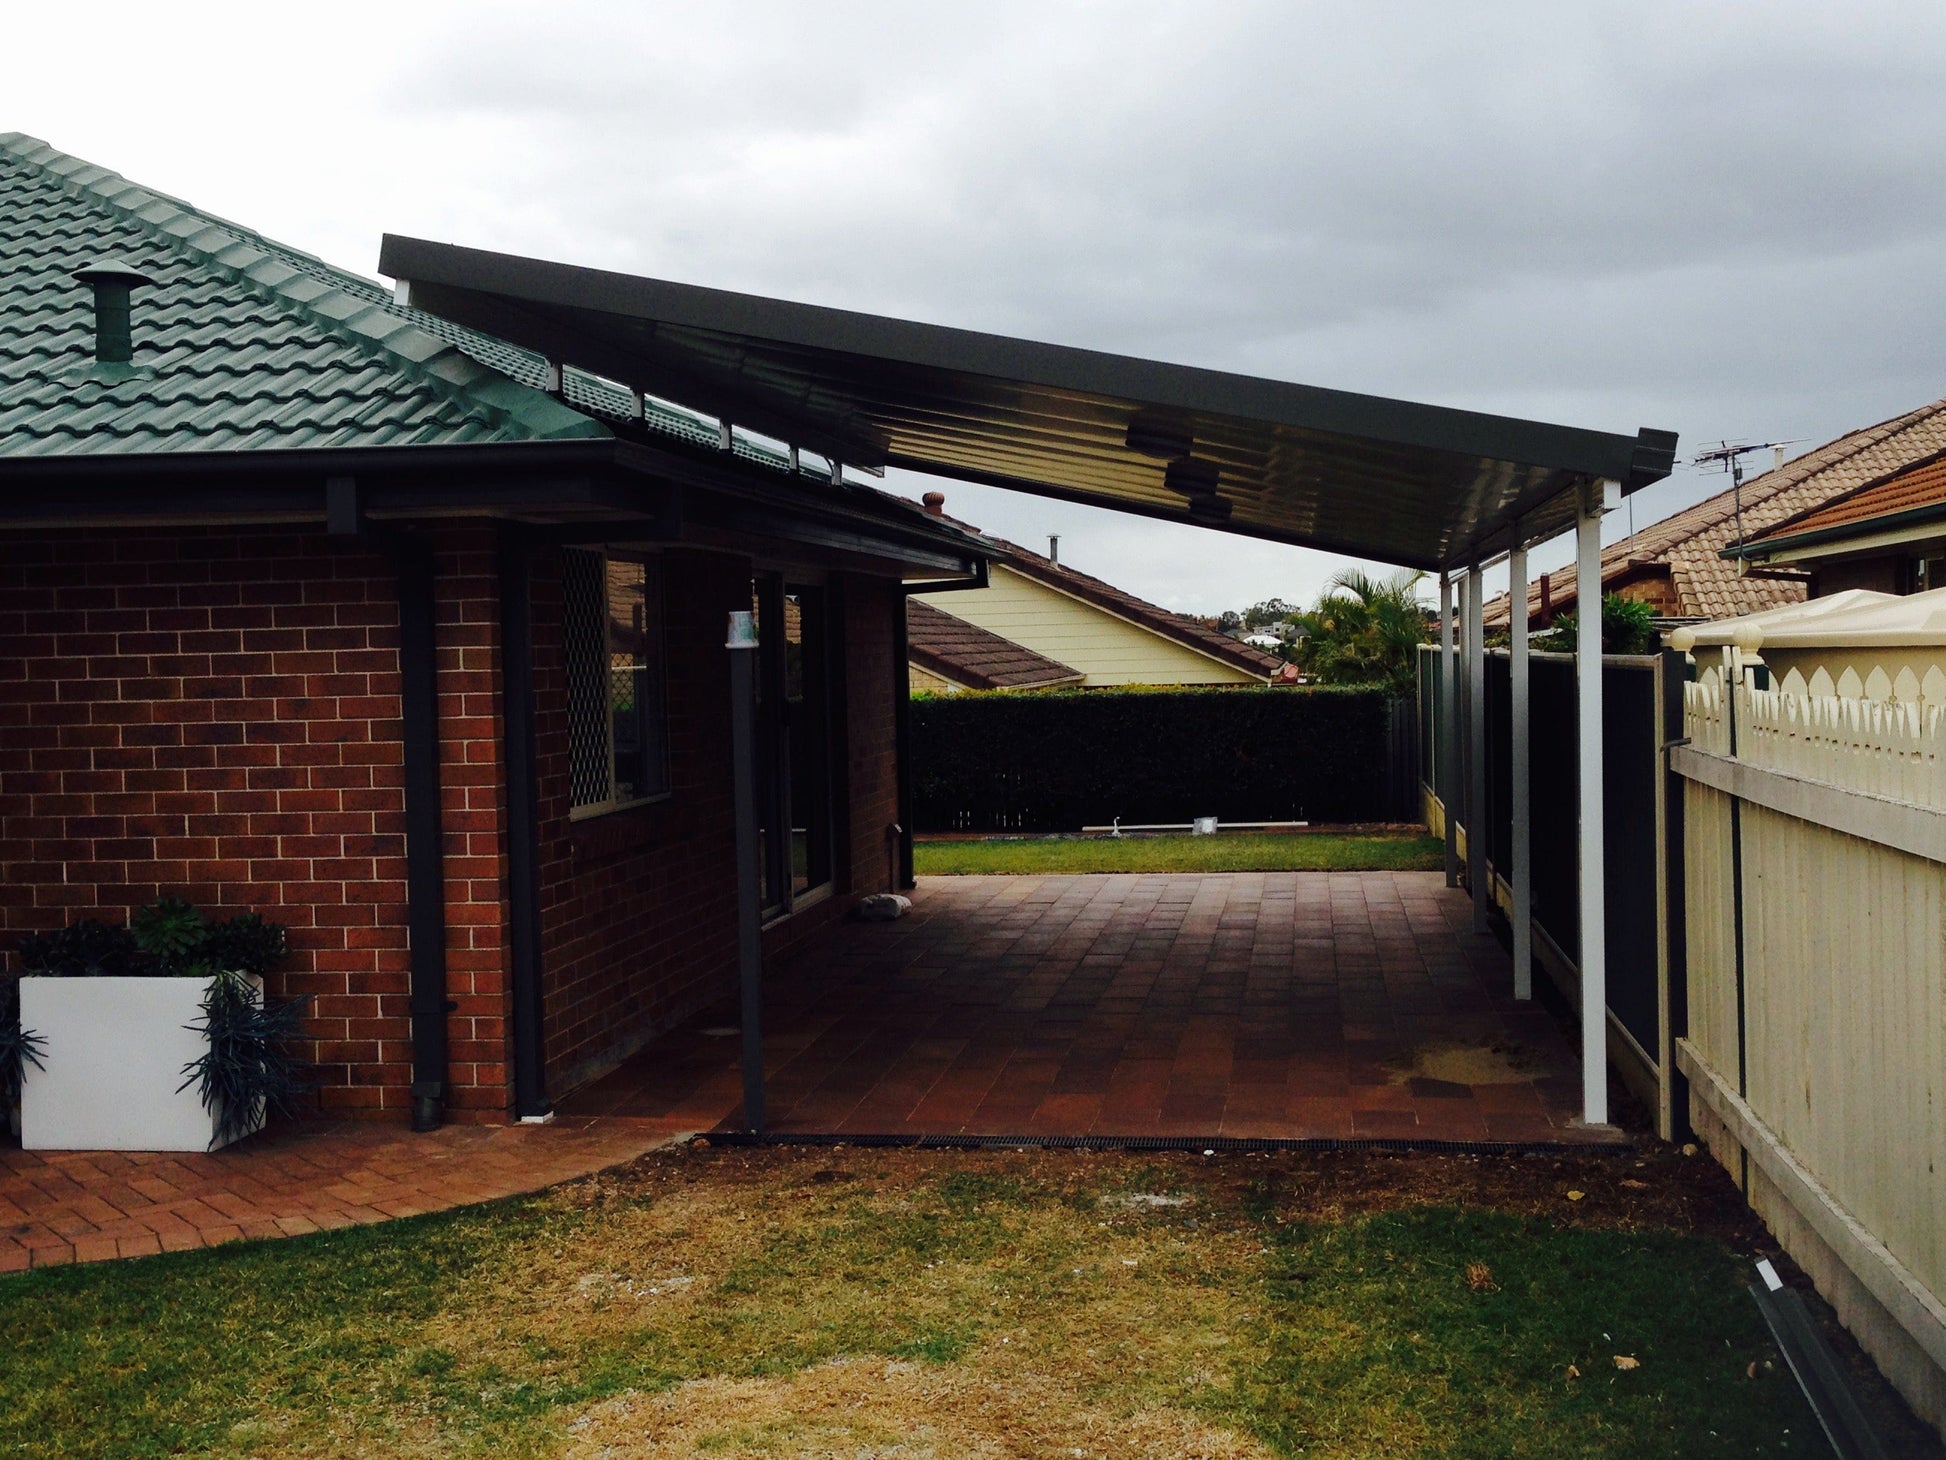 Insulated Flyover Patio Roof- 11m x 5m- Supply & Install QHI National